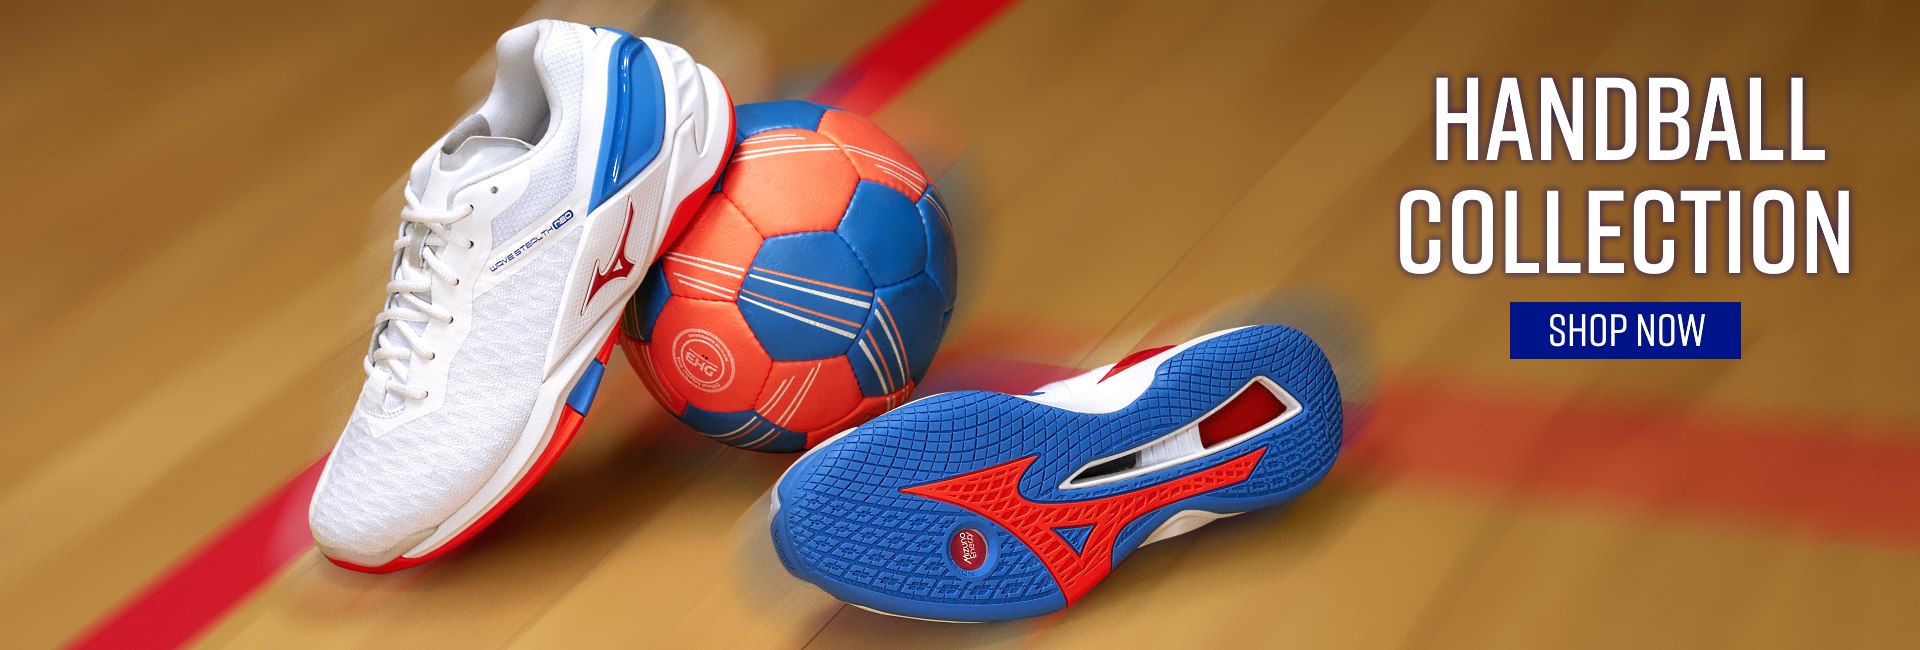 /articles/images/handball-newcollection.jpg